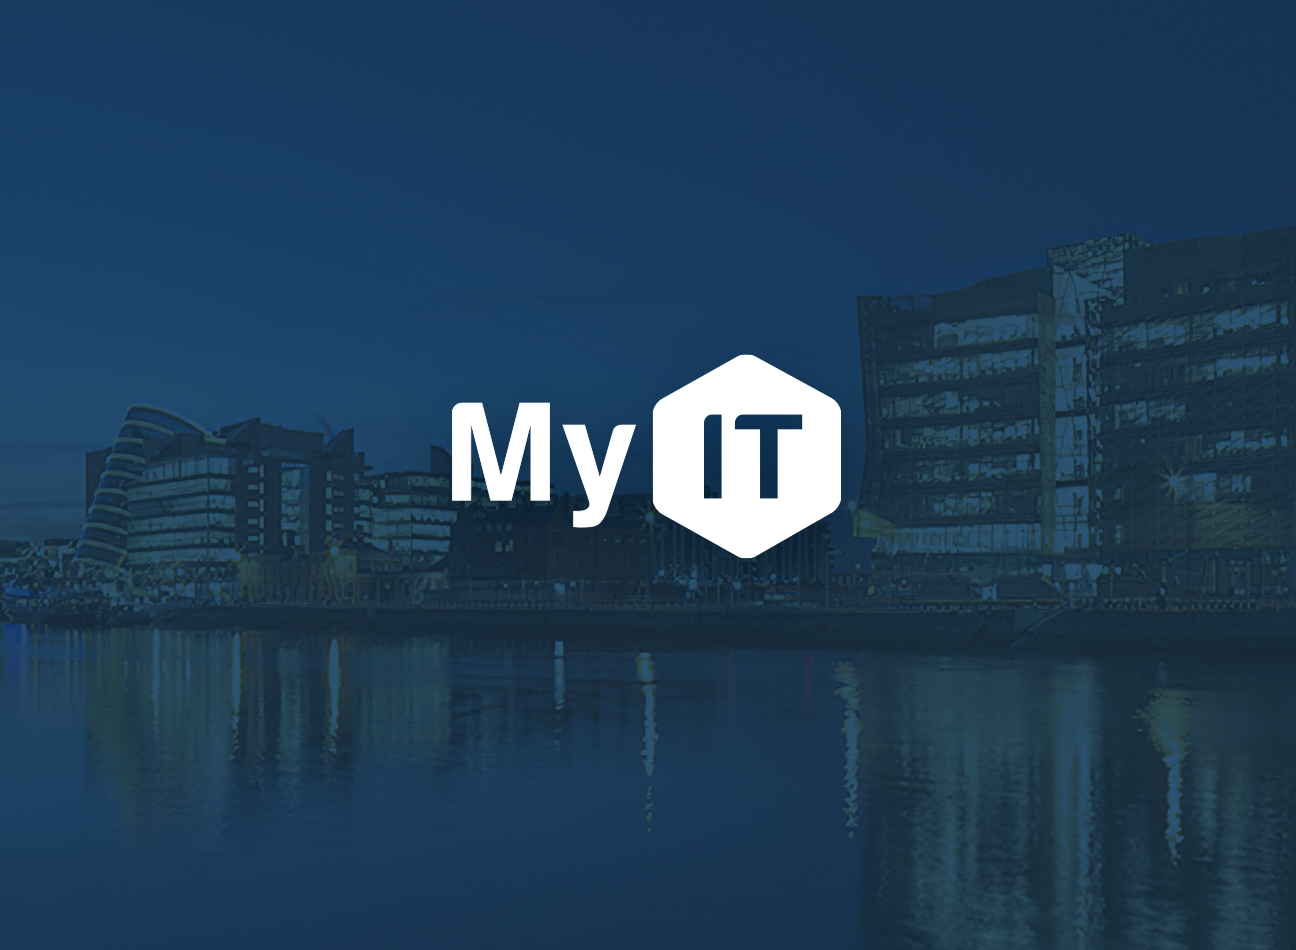 My IT logo on a background showing an image of the Central Bank of Ireland in Dublin